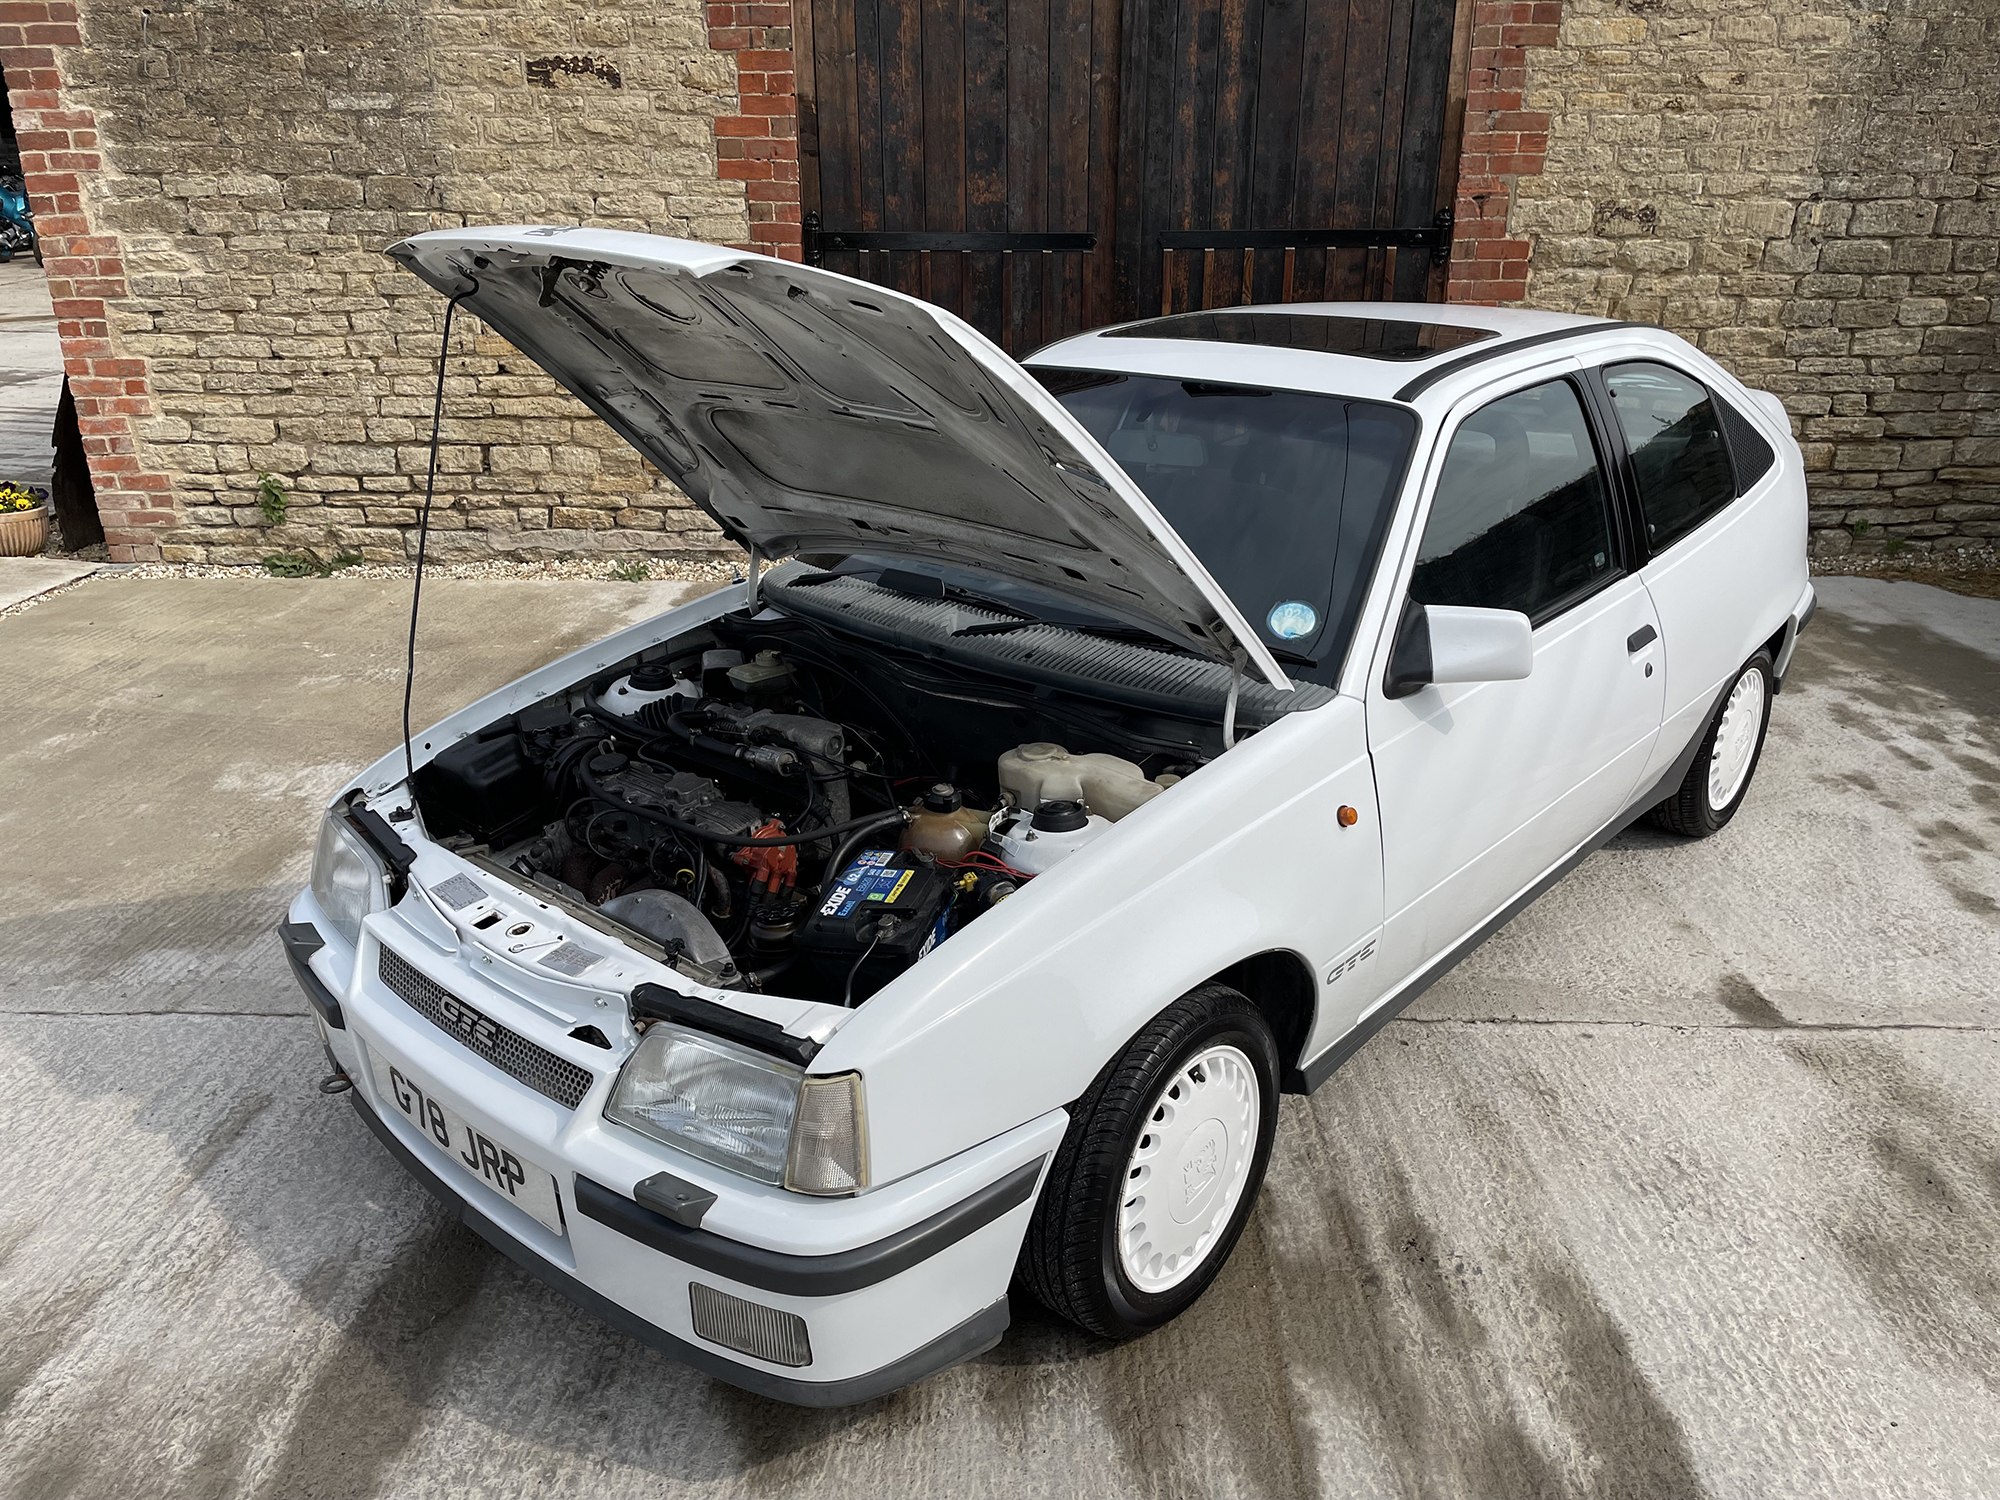 1989 Vauxhall Astra GTE 8V Reg. no. G78 JRP Chassis no. W0L000043LE112697 - Image 9 of 18